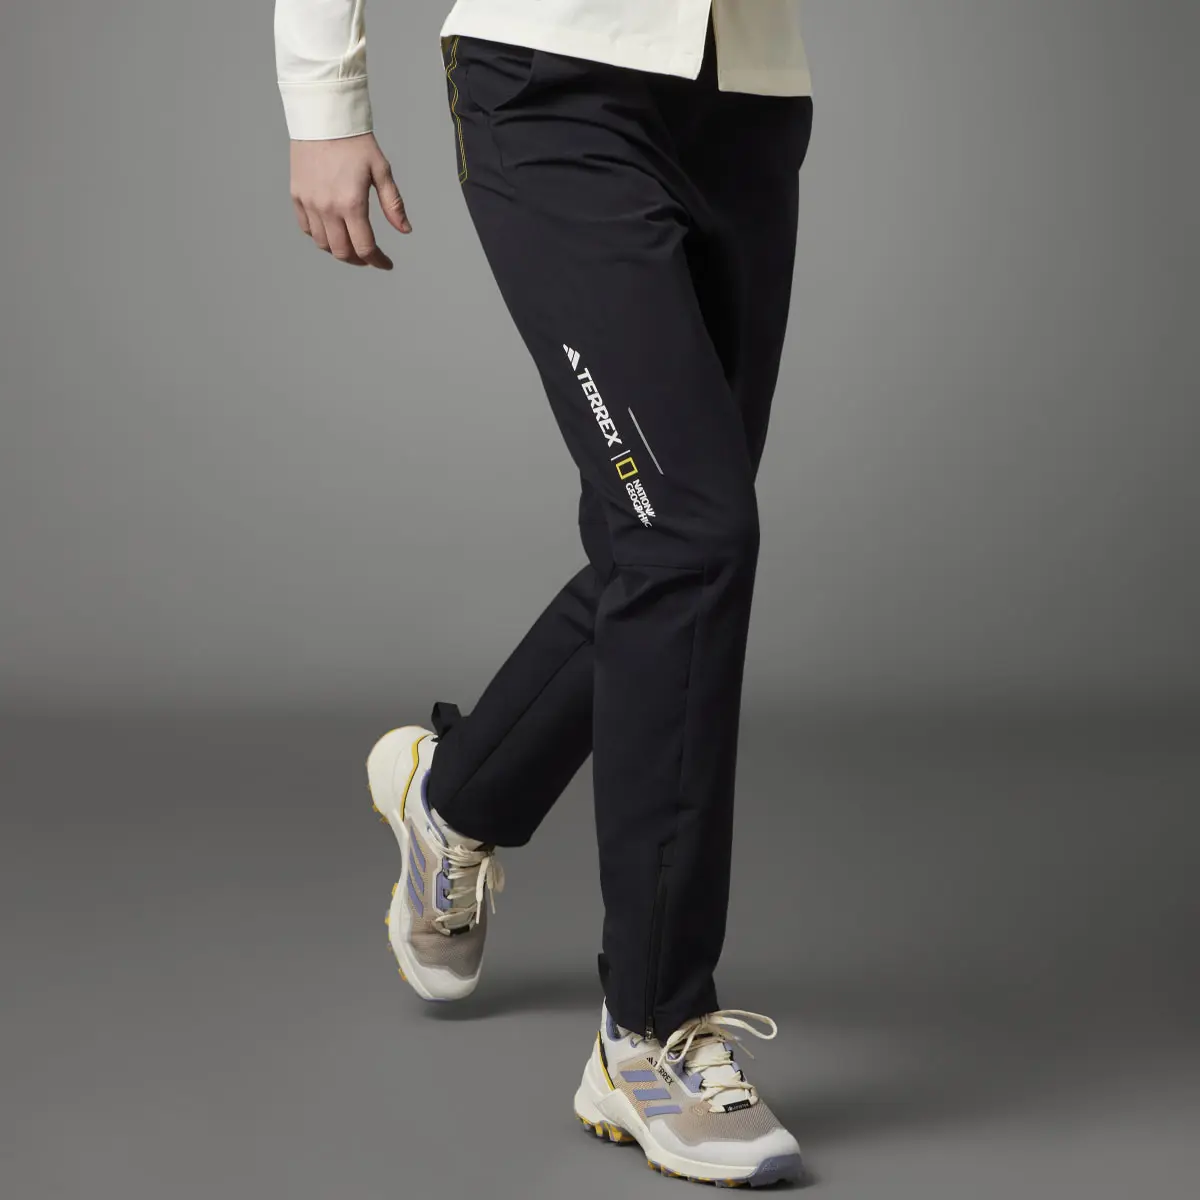 Adidas National Geographic Trousers. 1